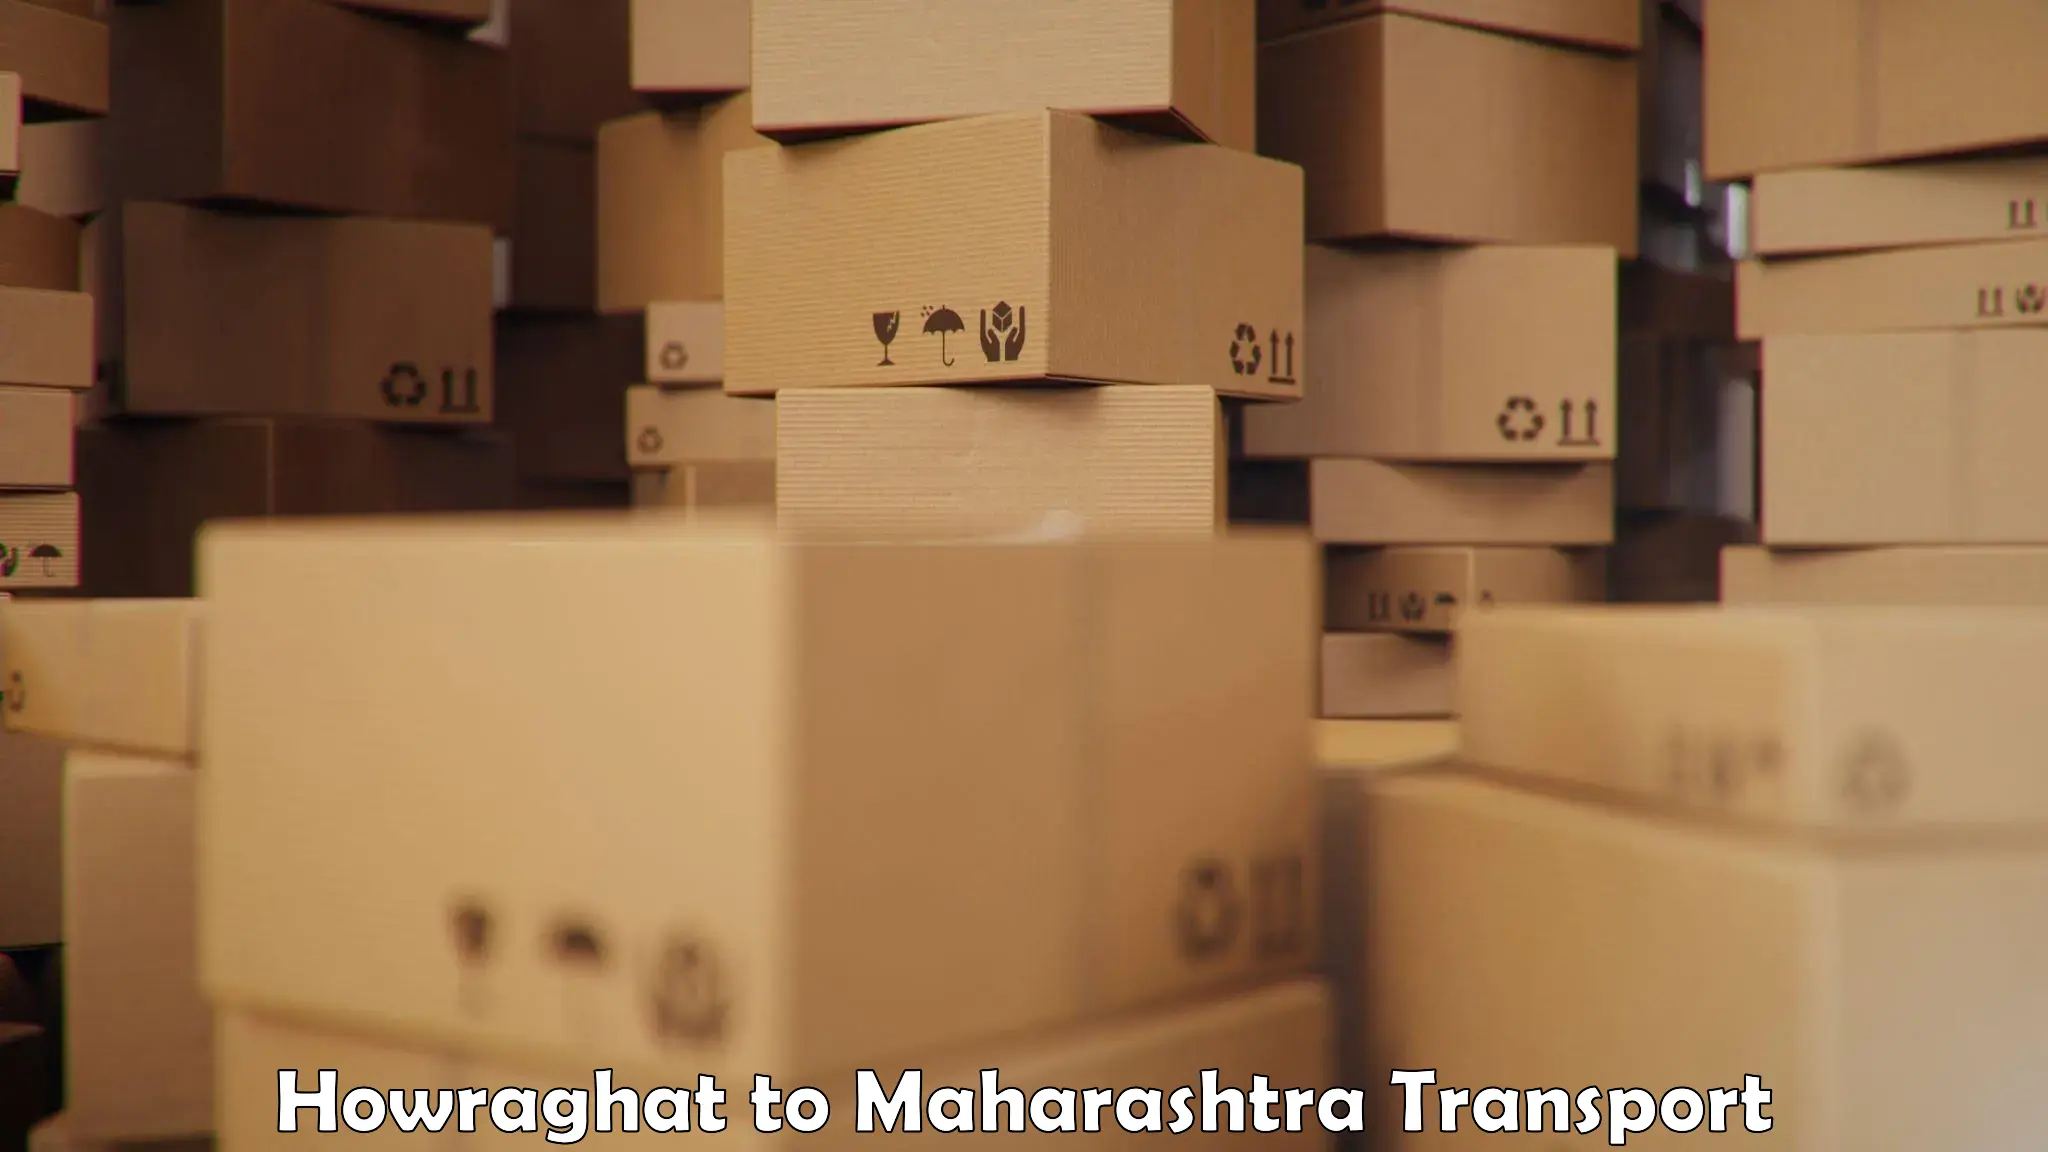 India truck logistics services Howraghat to Mangaon